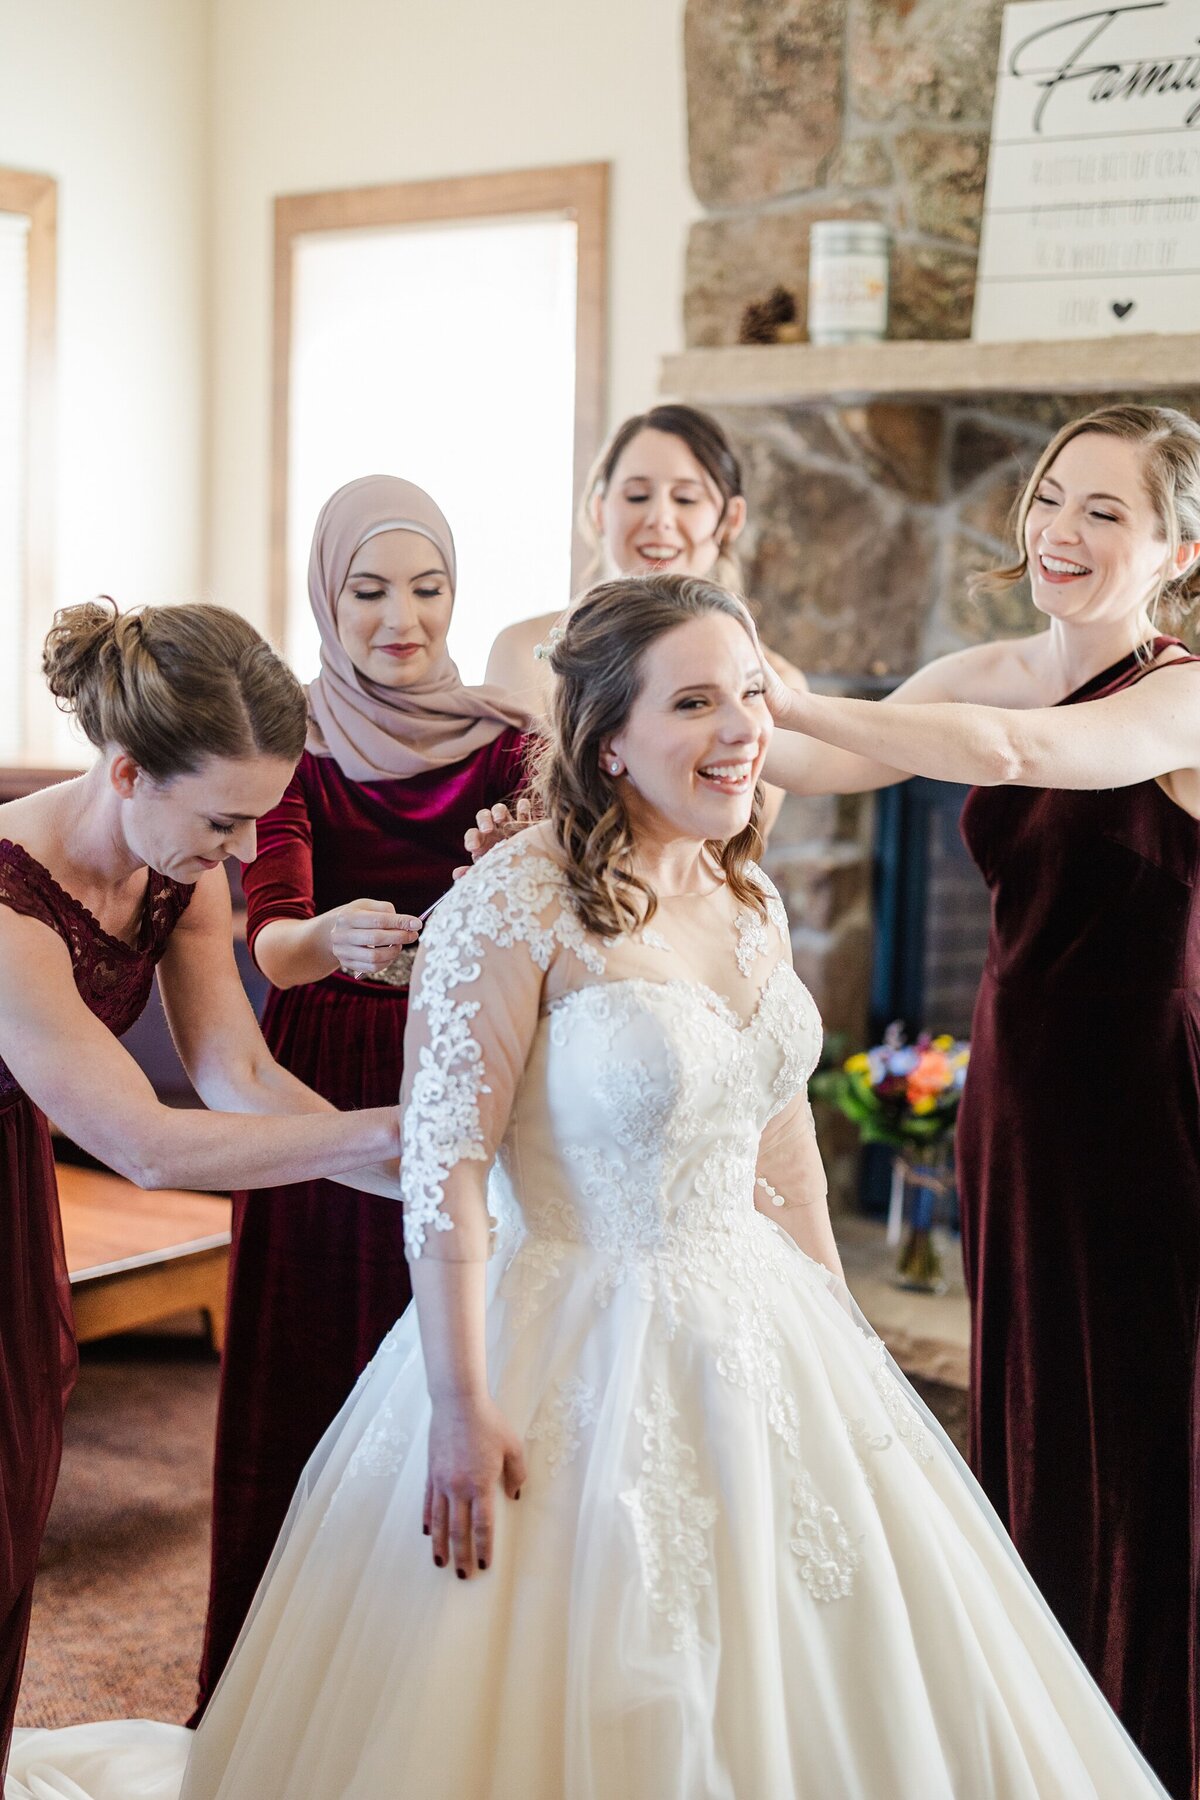 A bride standing and laughing as her bridesmaids help lace up her wedding dress before her ceremony at the YMCA of the Rockies in Estes Park, Colorado. The bride is wearing a long, flowing white dress with floral sleeves. The bridesmaids are all smiling and helping out while wearing dark burgundy dresses.